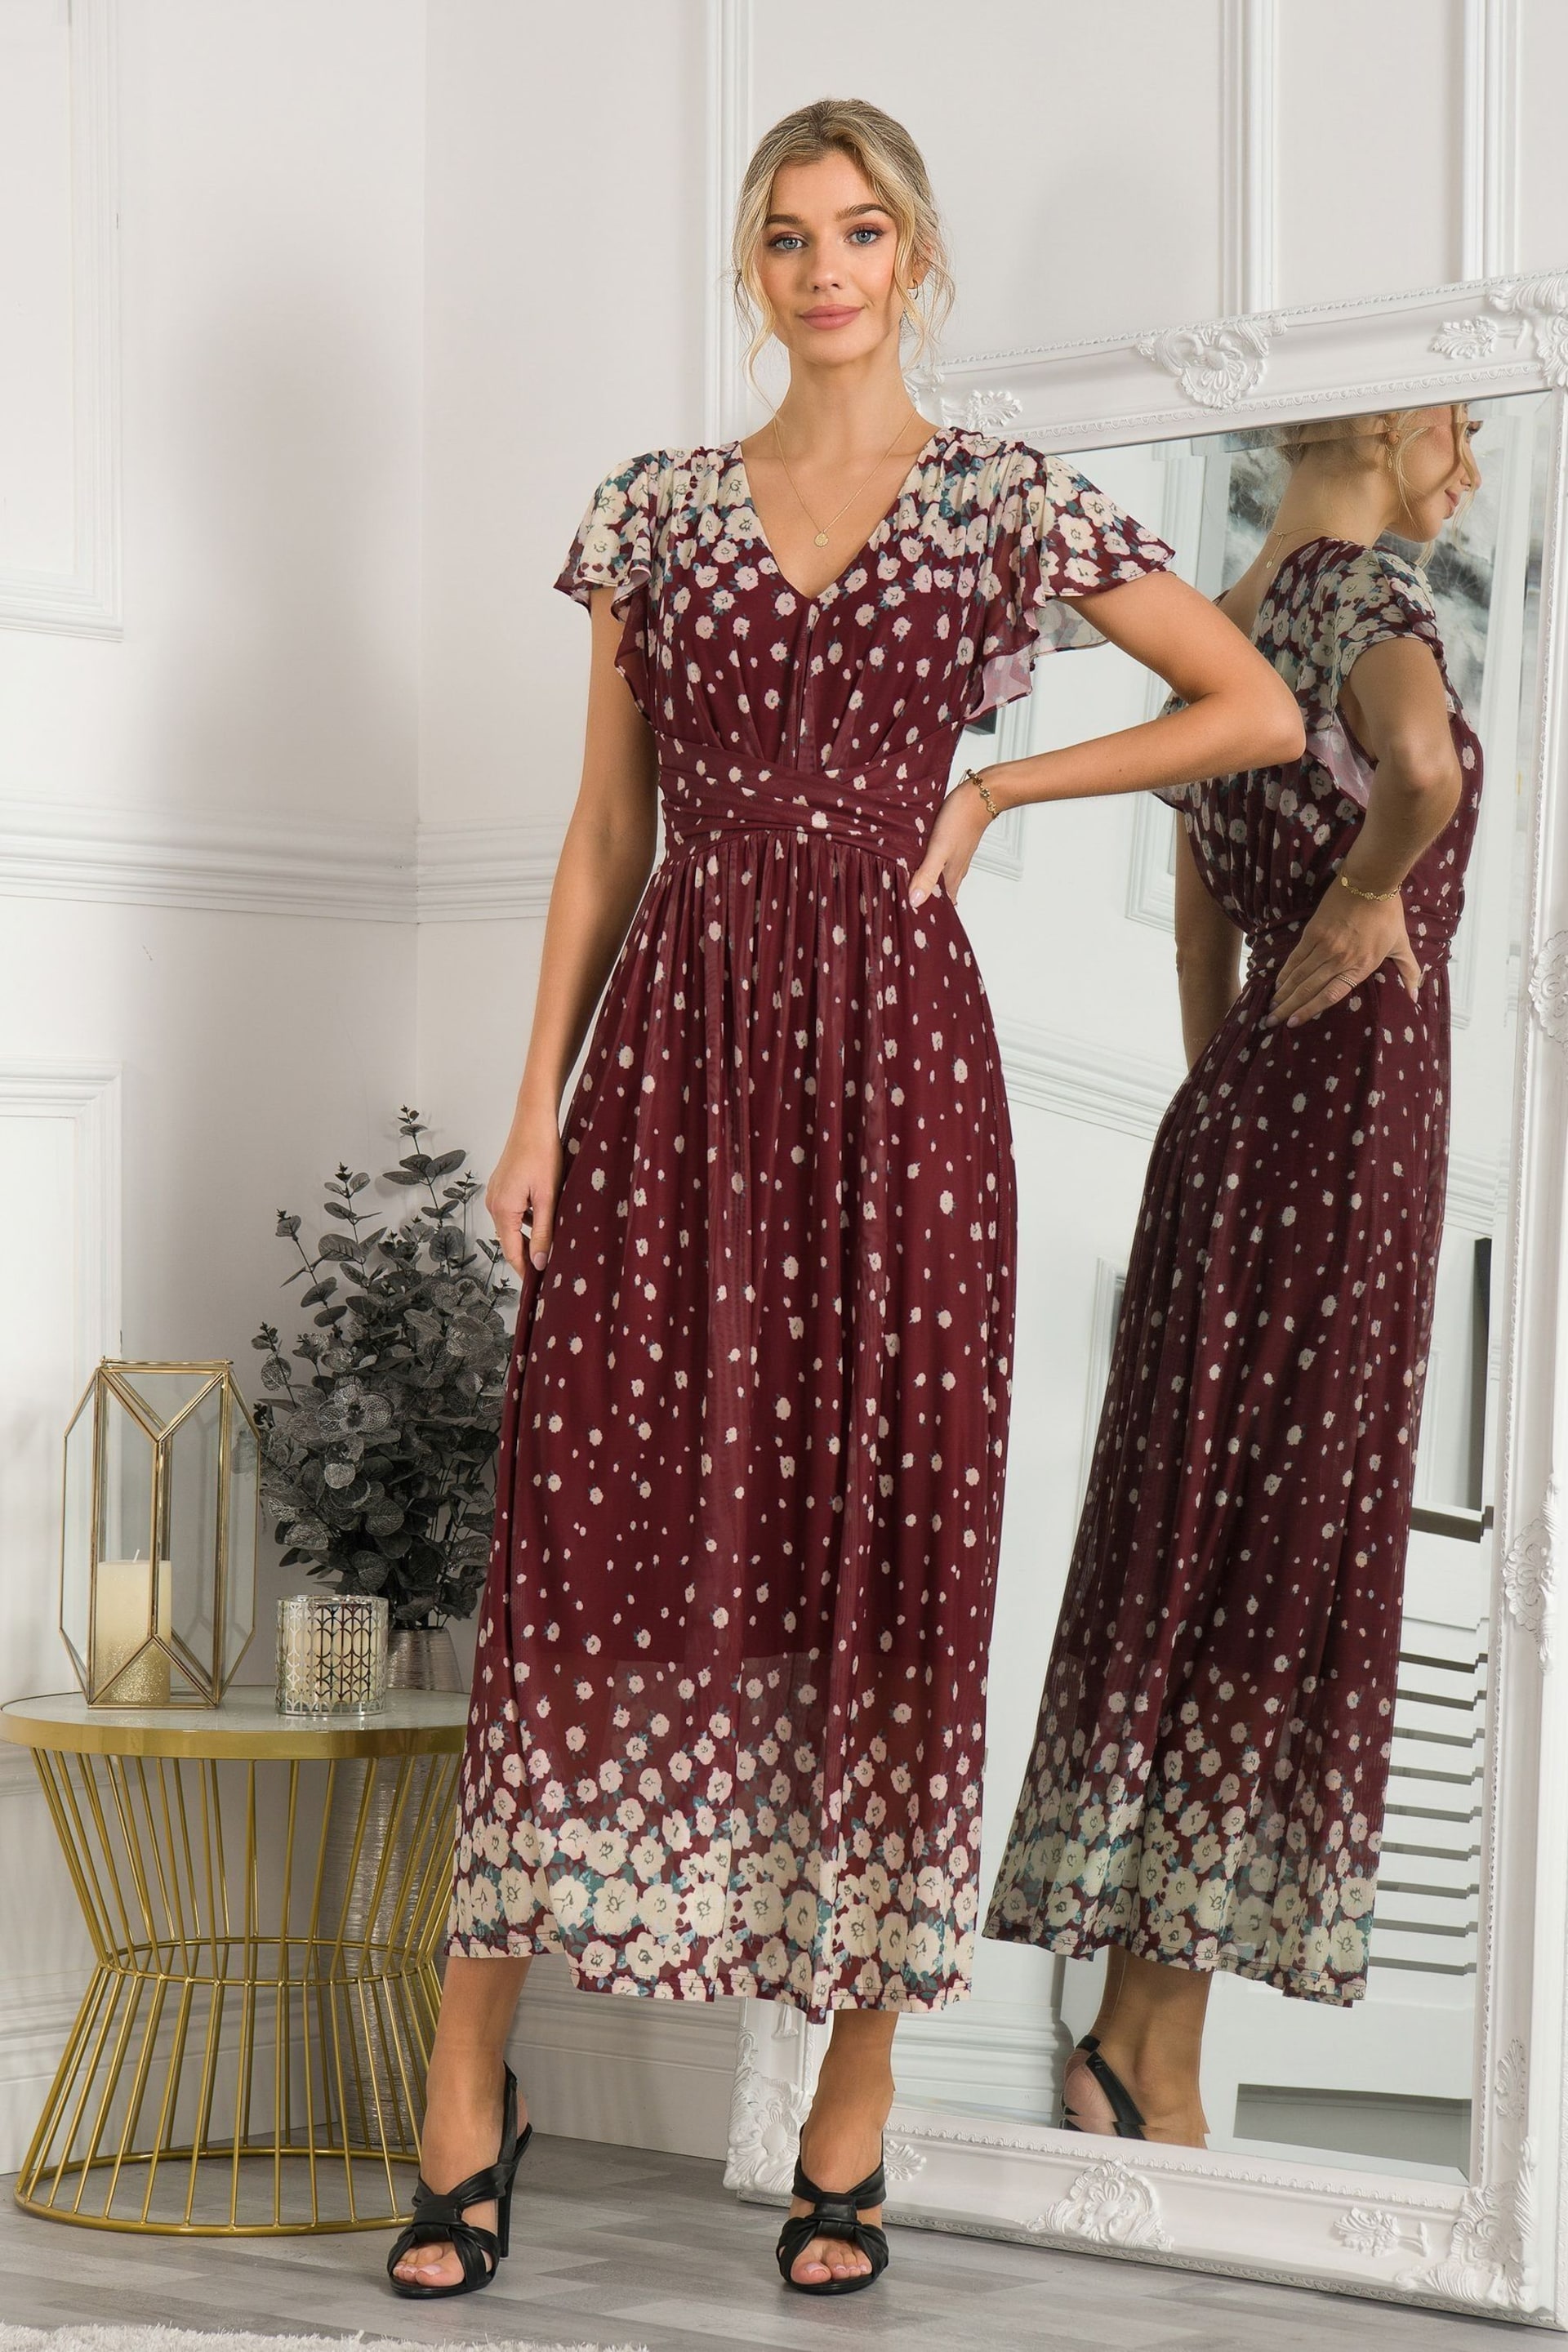 Jolie Moi Red Mably Mirror Print Maxi Mesh Dress - Image 3 of 5